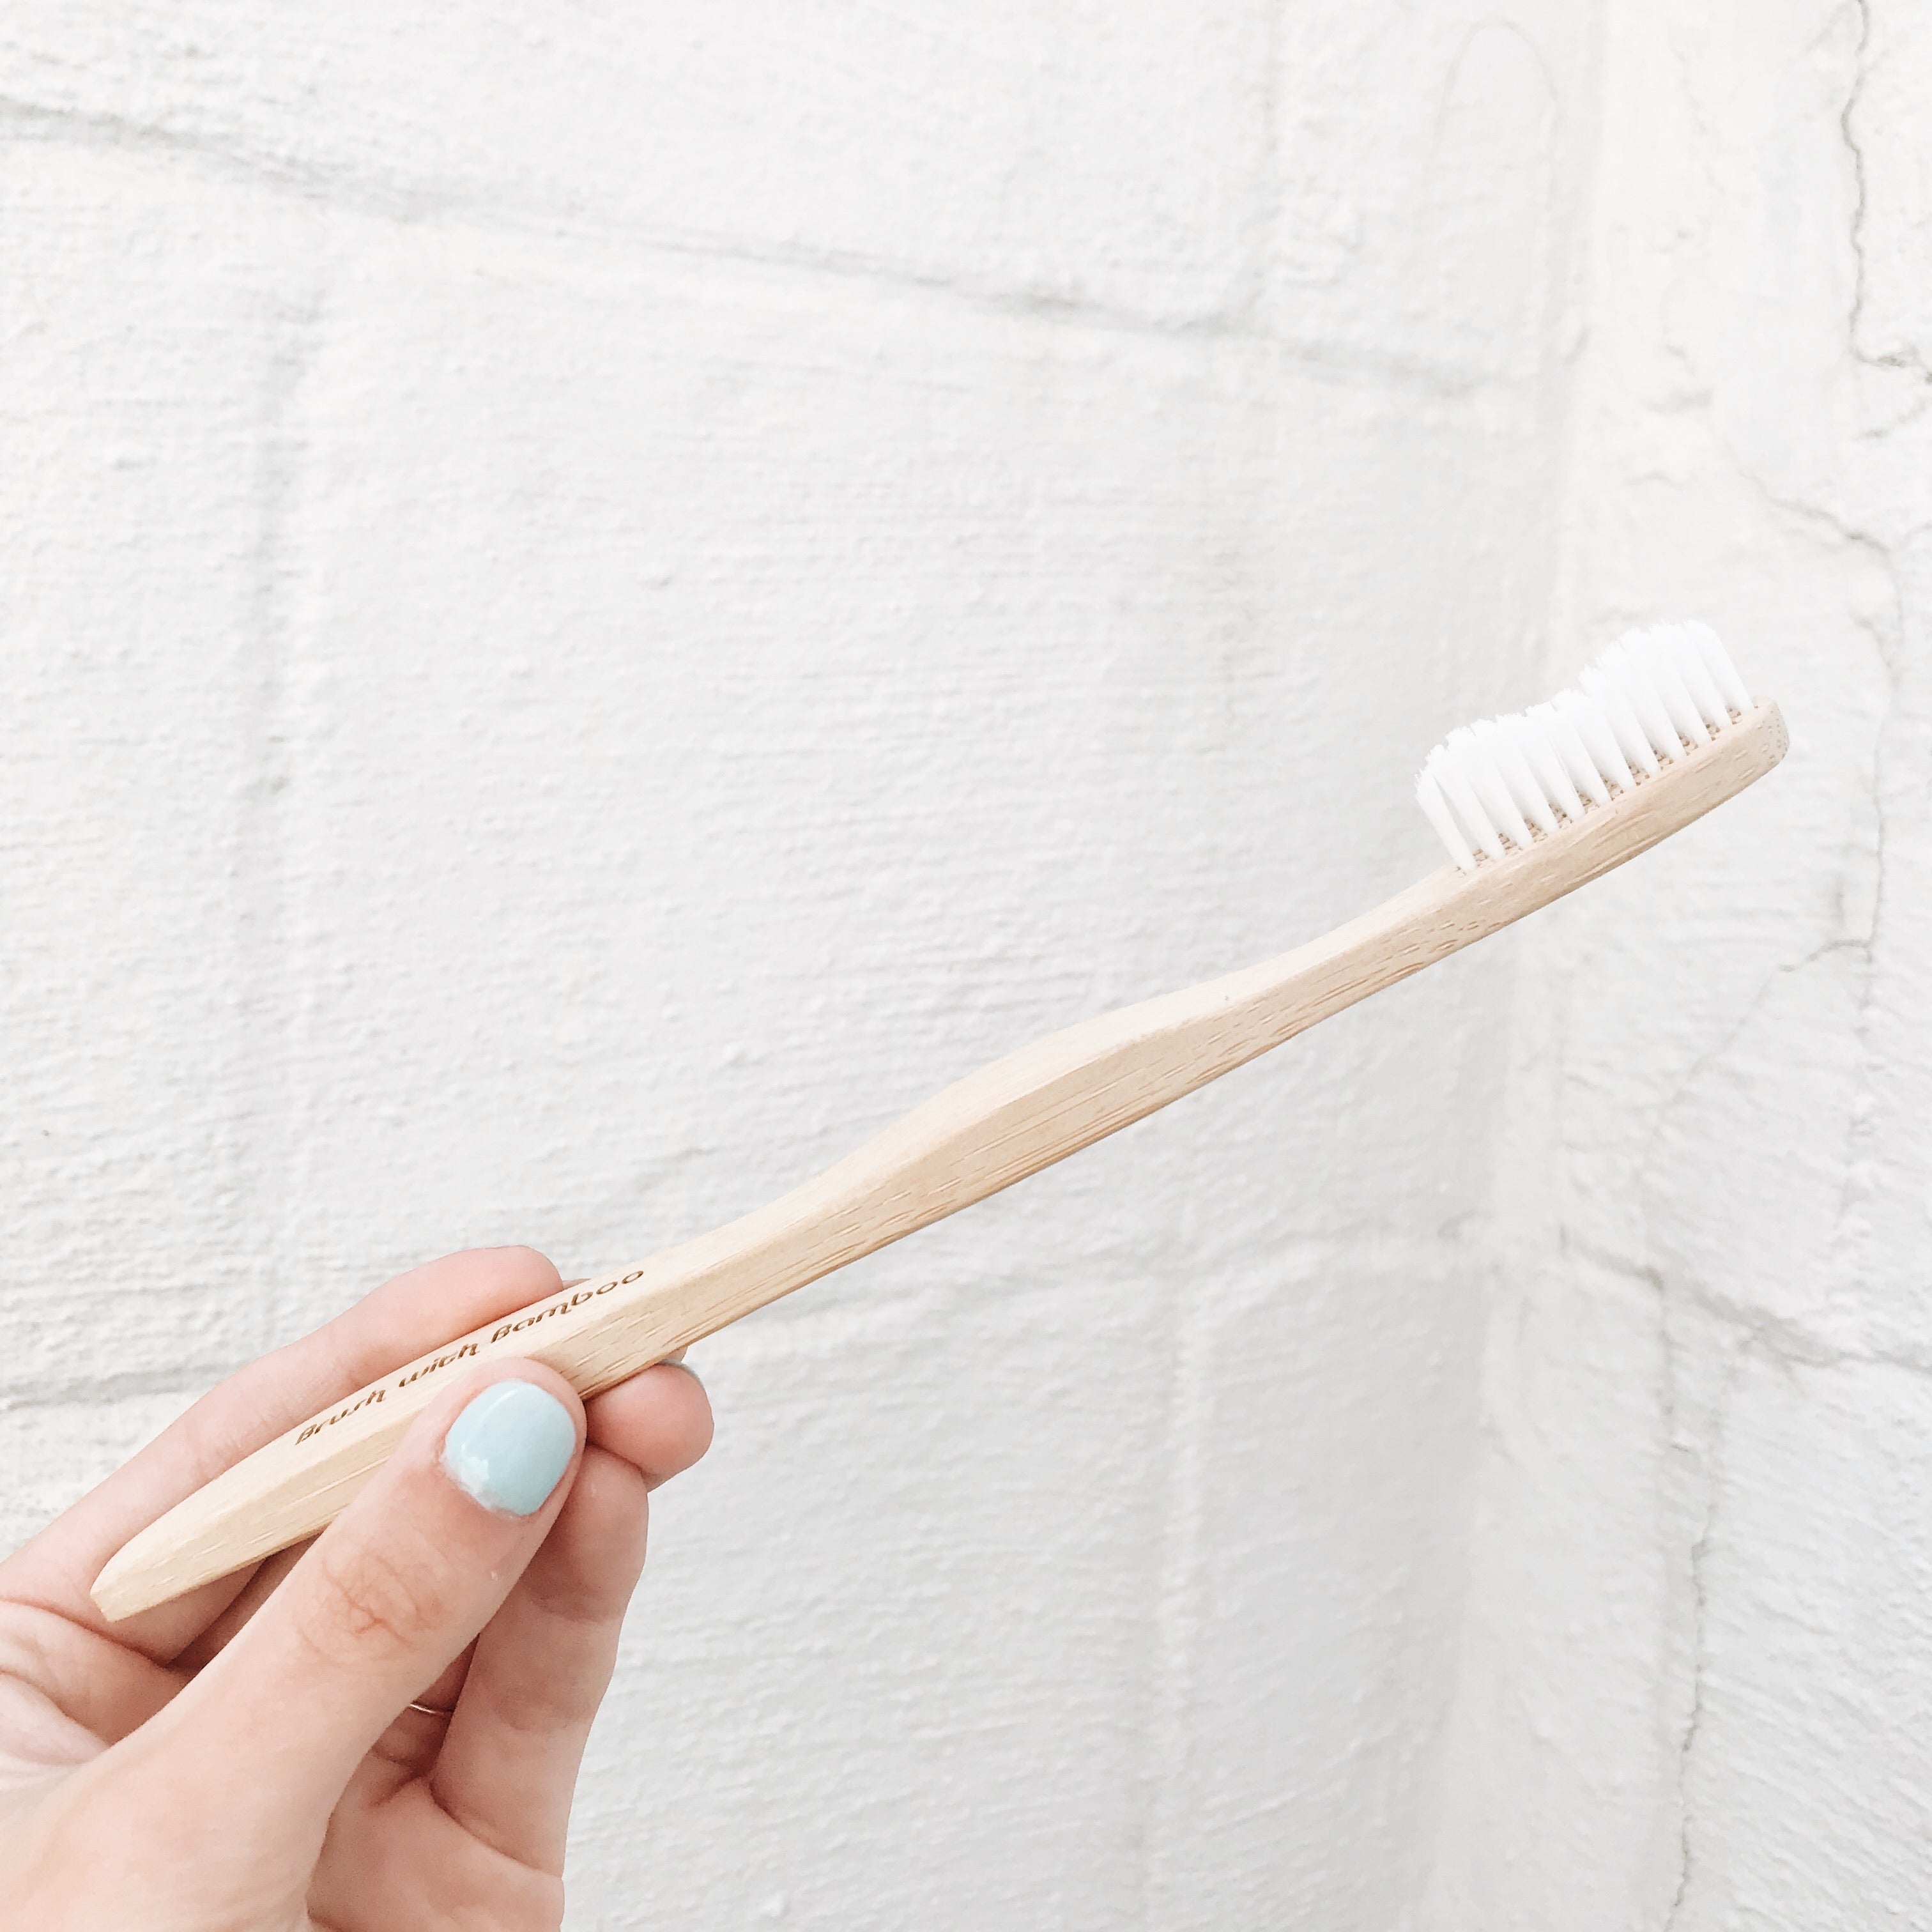 Our bamboo toothbrush has a compostable handle because it is made of wood. The handle features curves to ensure a comfortable grip while brushing your teeth. The bristles are vegan and USDA certified biobased bristles.